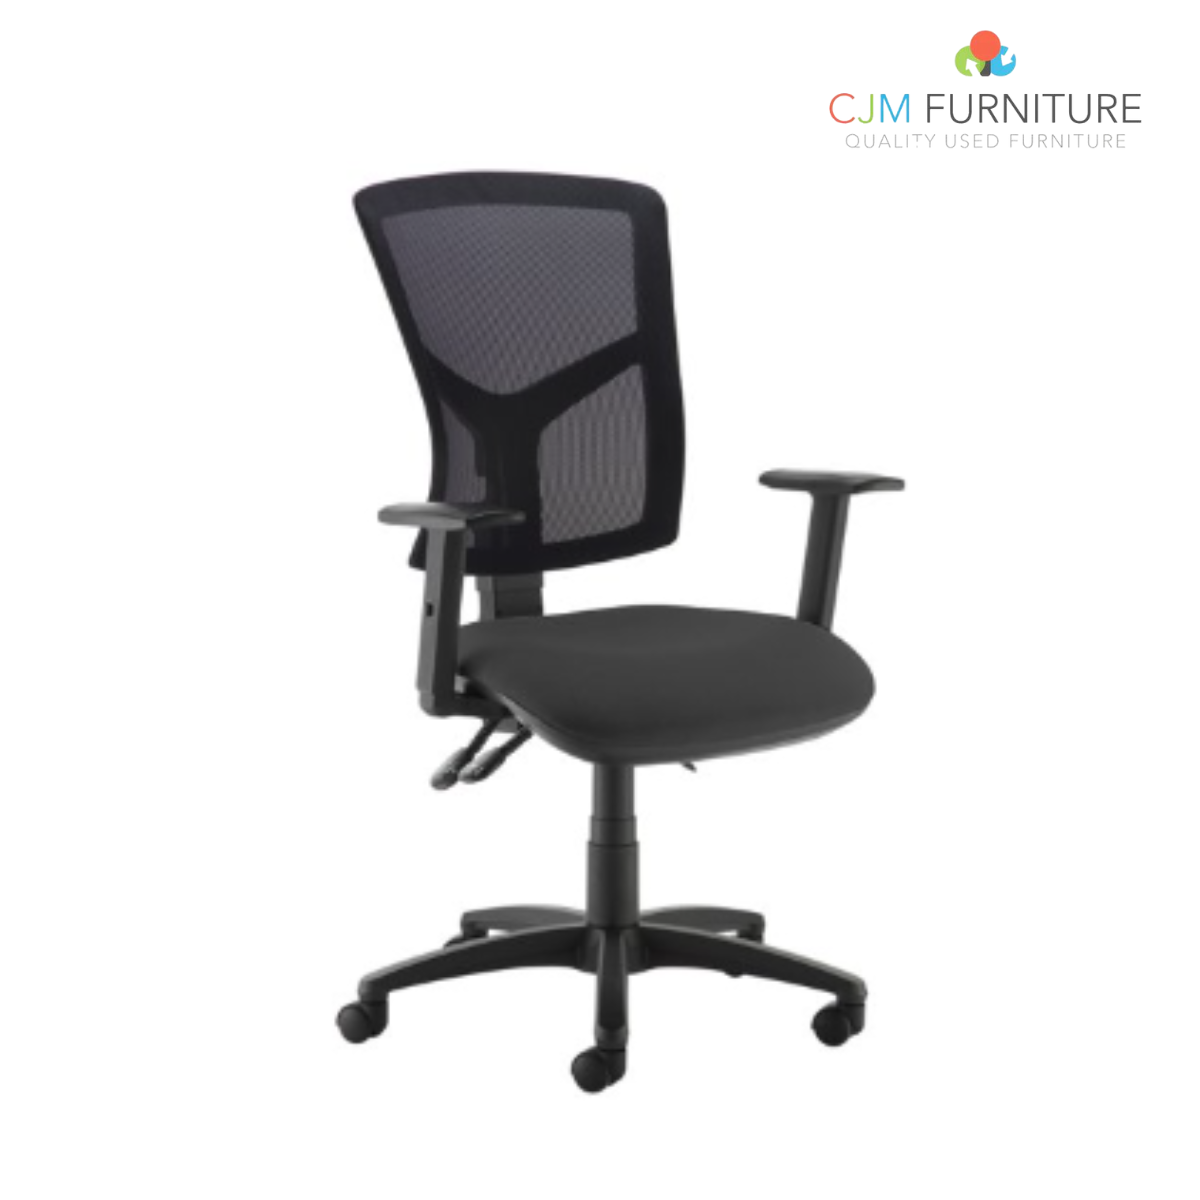 Senza mesh 3 lever swivel chair with HA Back and arms   12/04/21